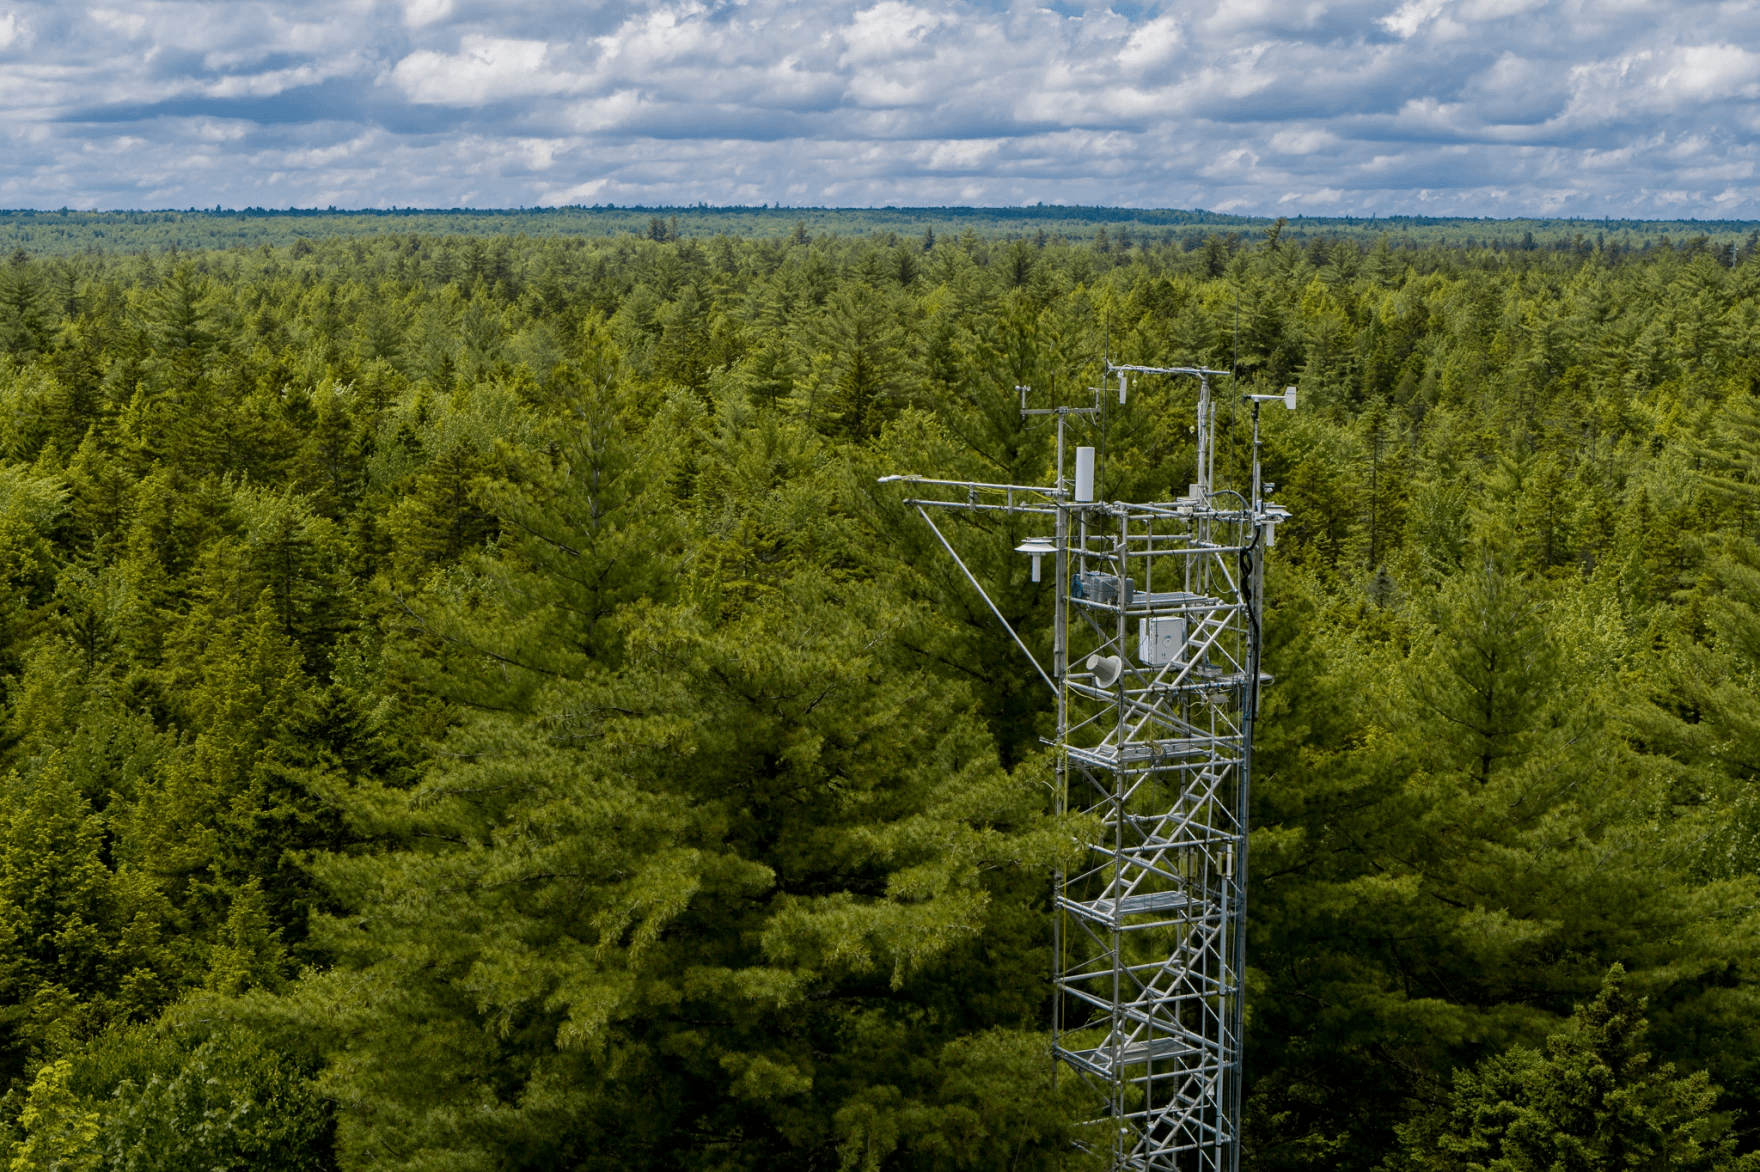 The view from the main tower at the Howland Research Forest. (Courtesy Kris Bridges)